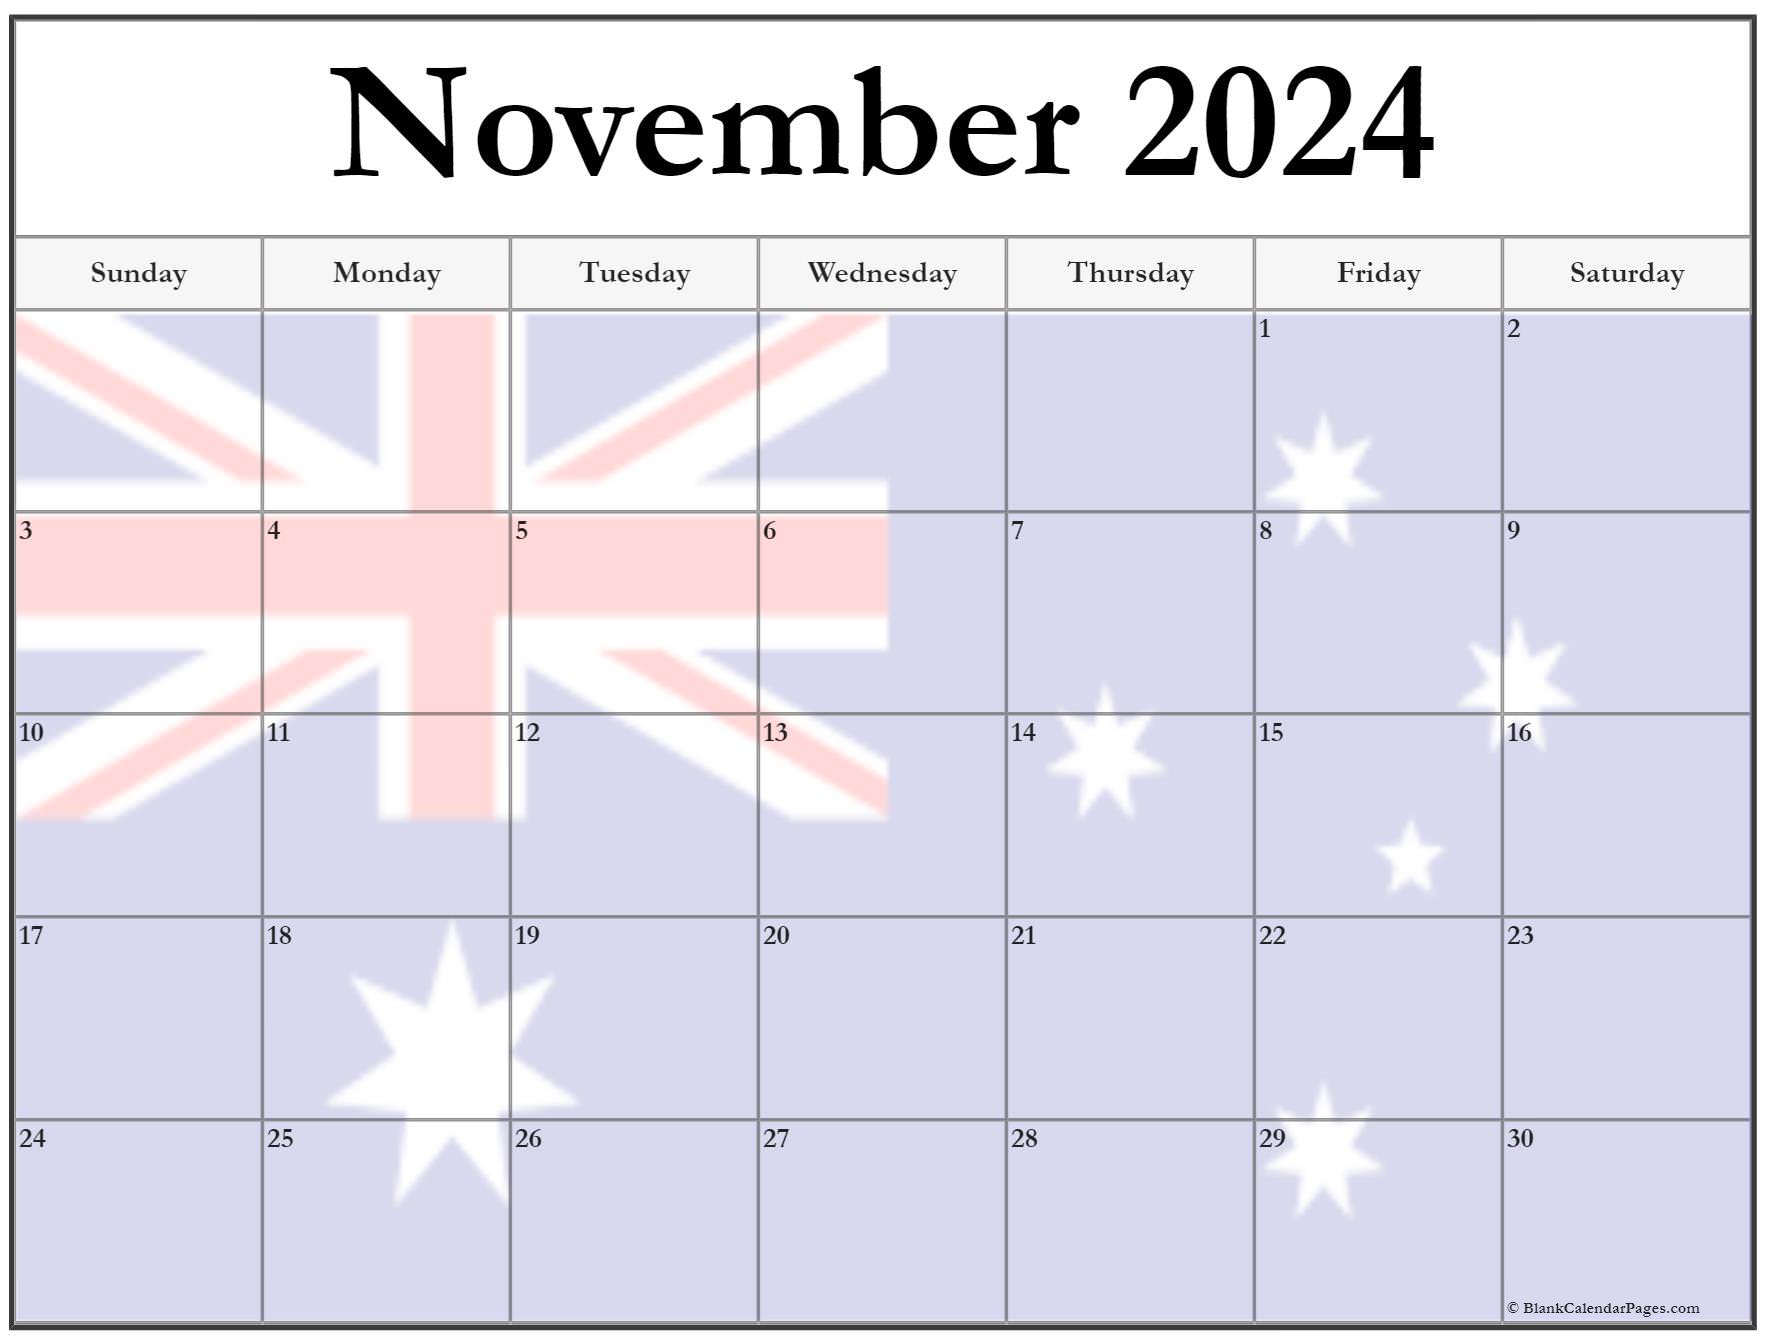 collection-of-november-2024-photo-calendars-with-image-filters